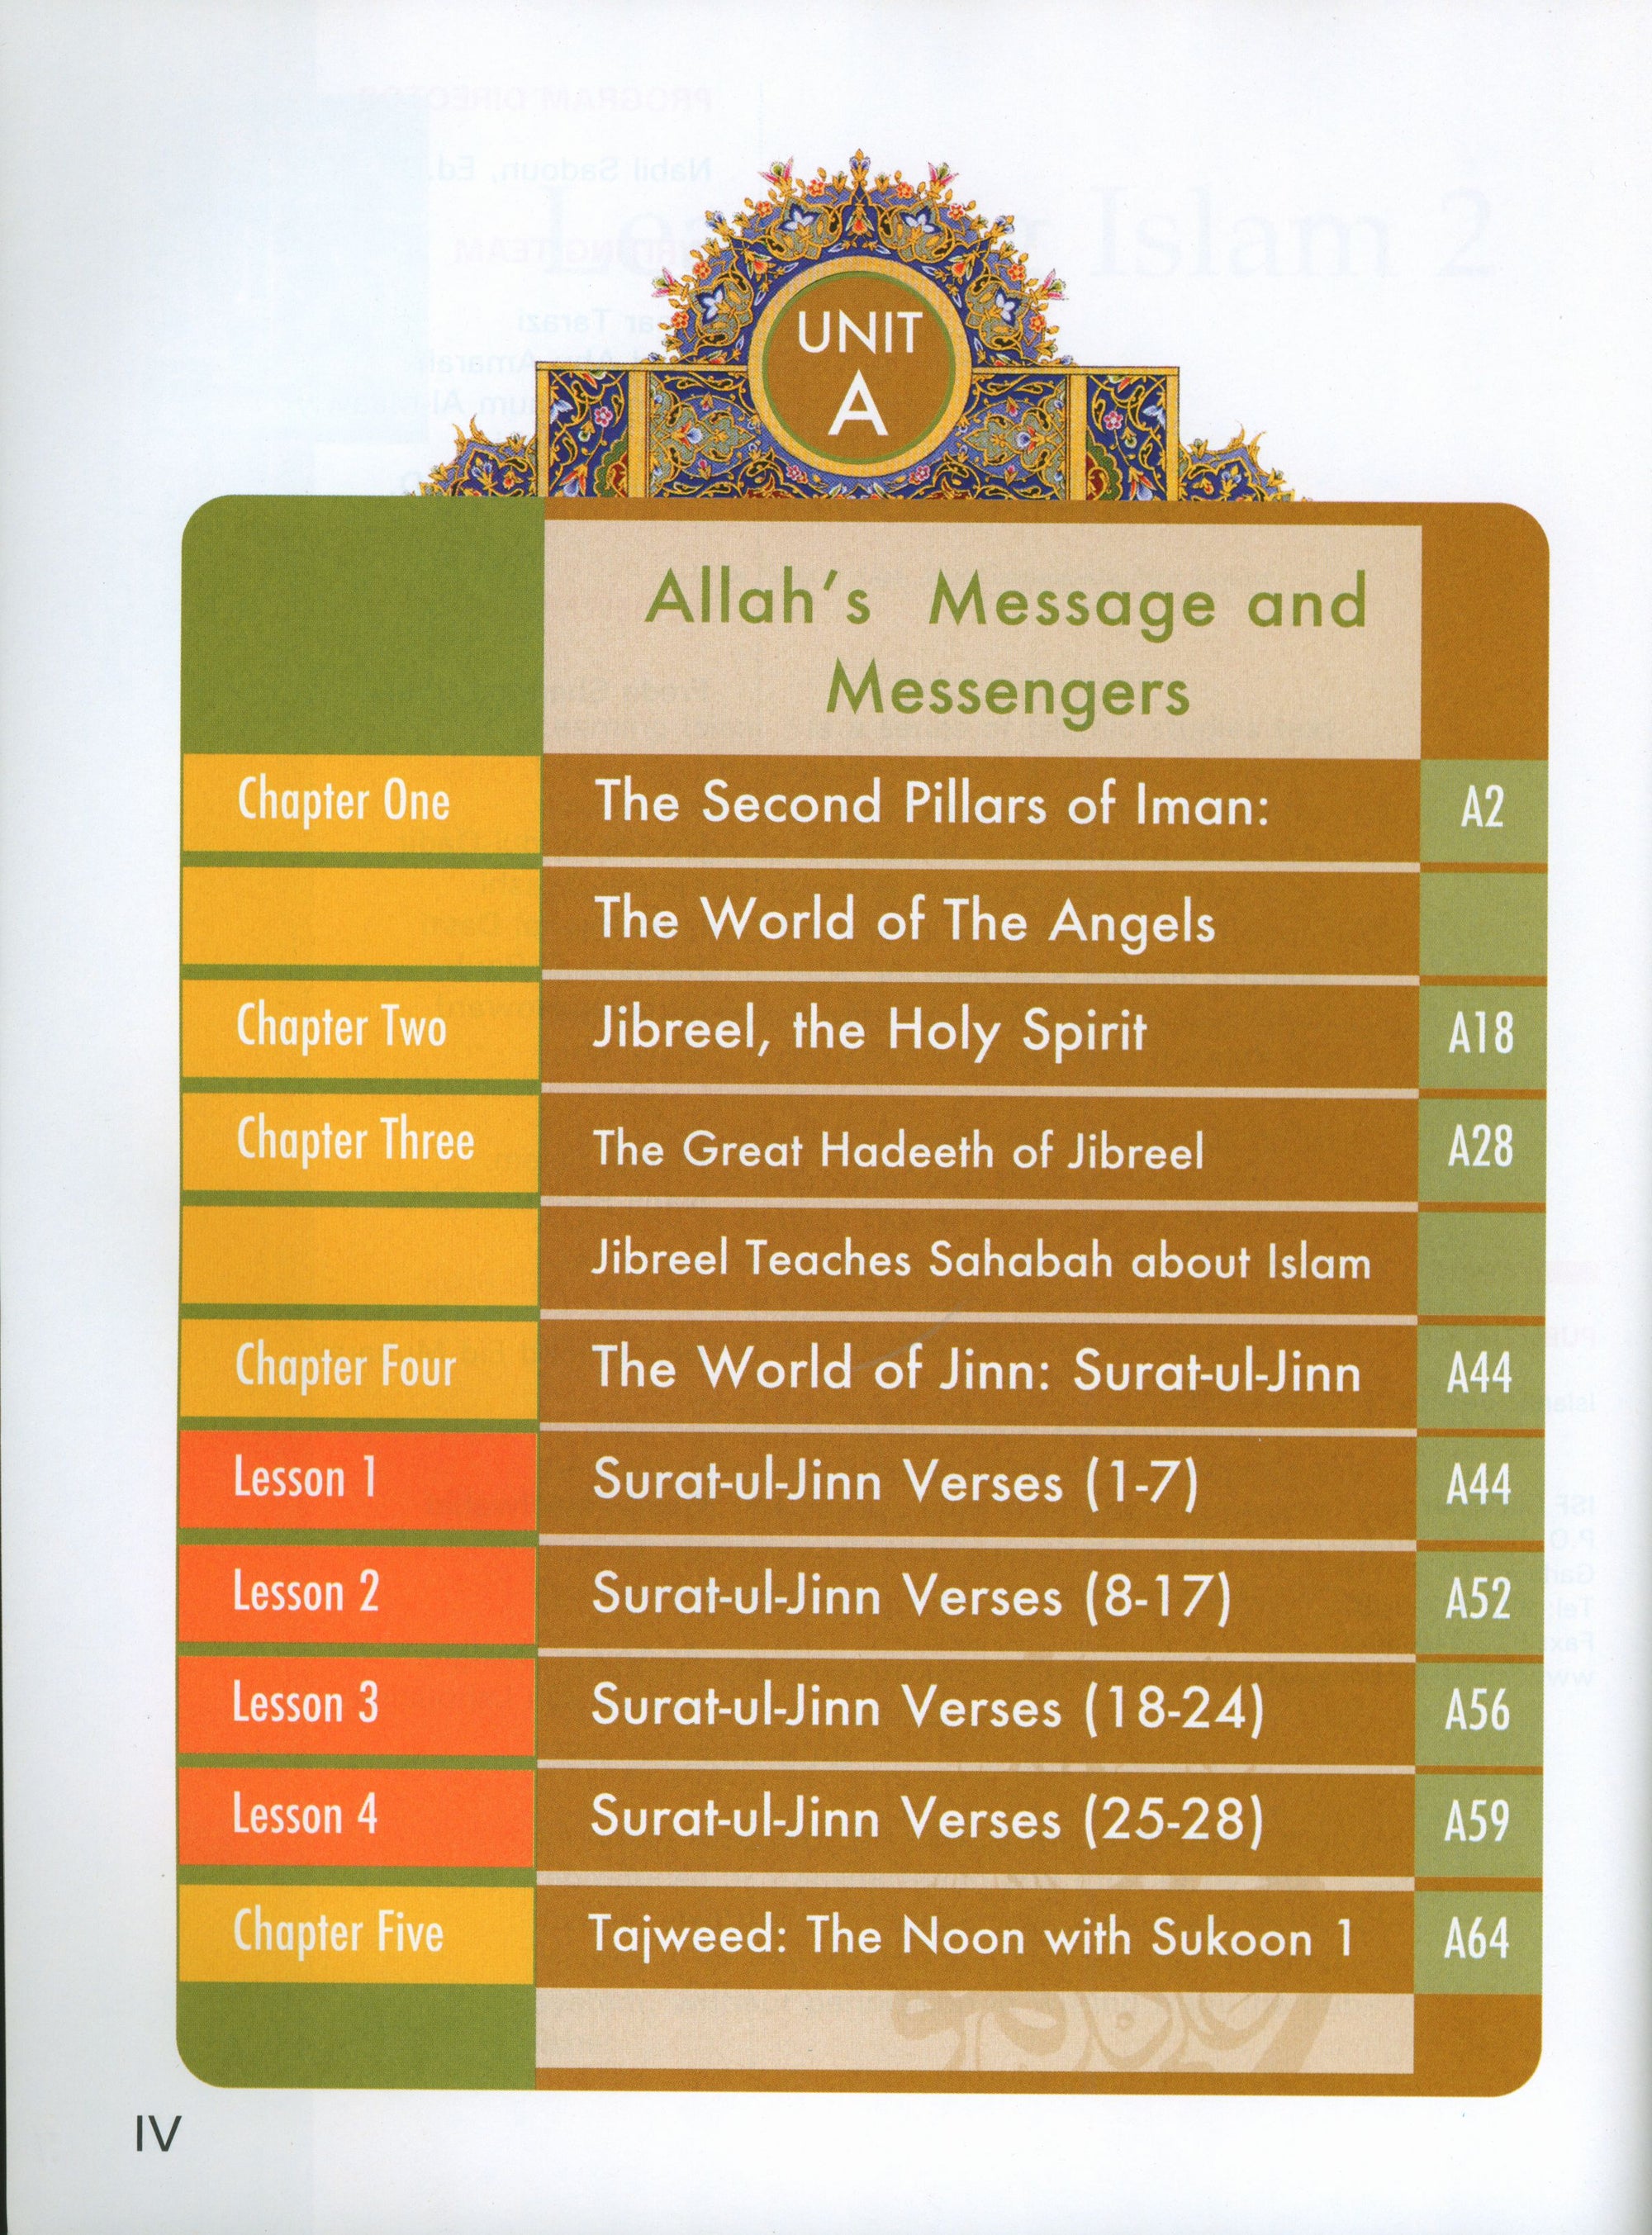 Learning Islam Weekend Edition Textbook Level 2 (7th Grade)